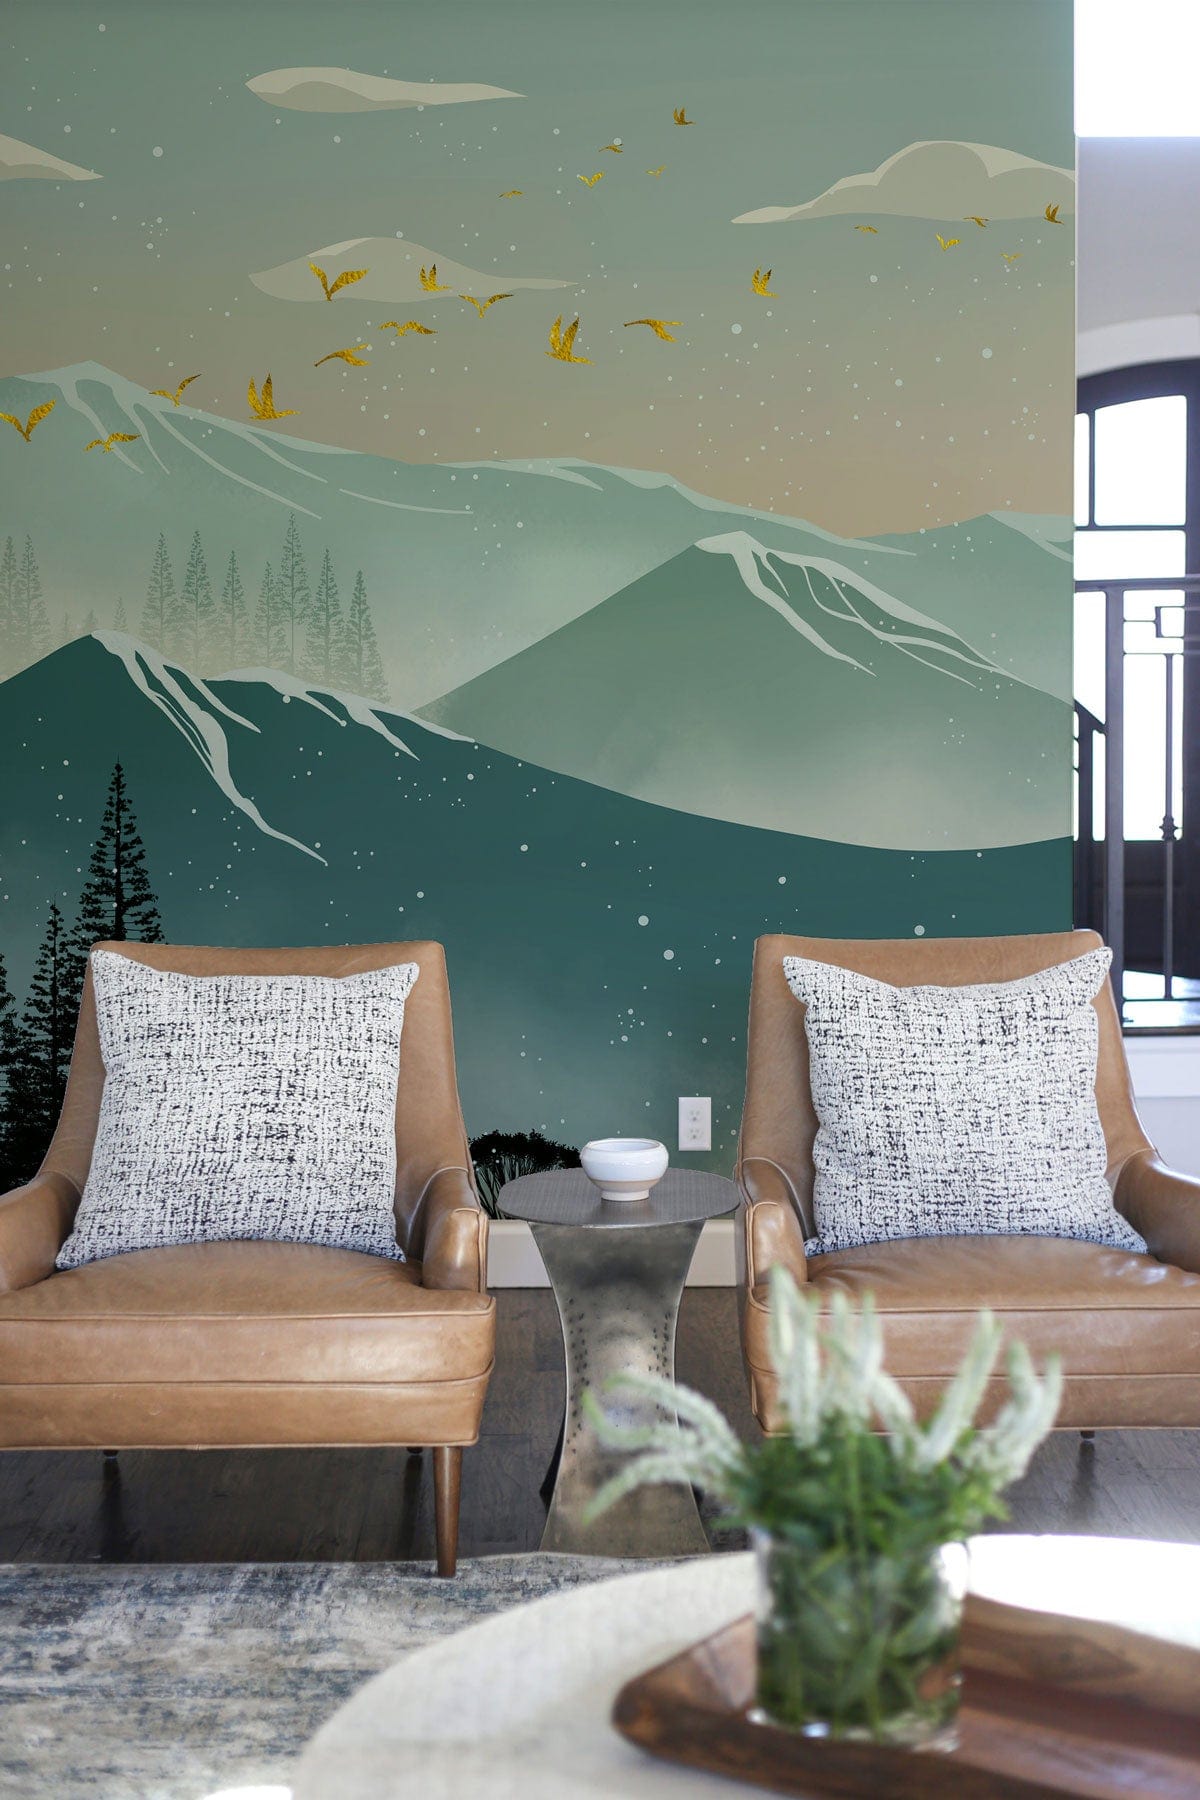 wallpaper design in the form of an ombre green mountain range with forest peaks adornment